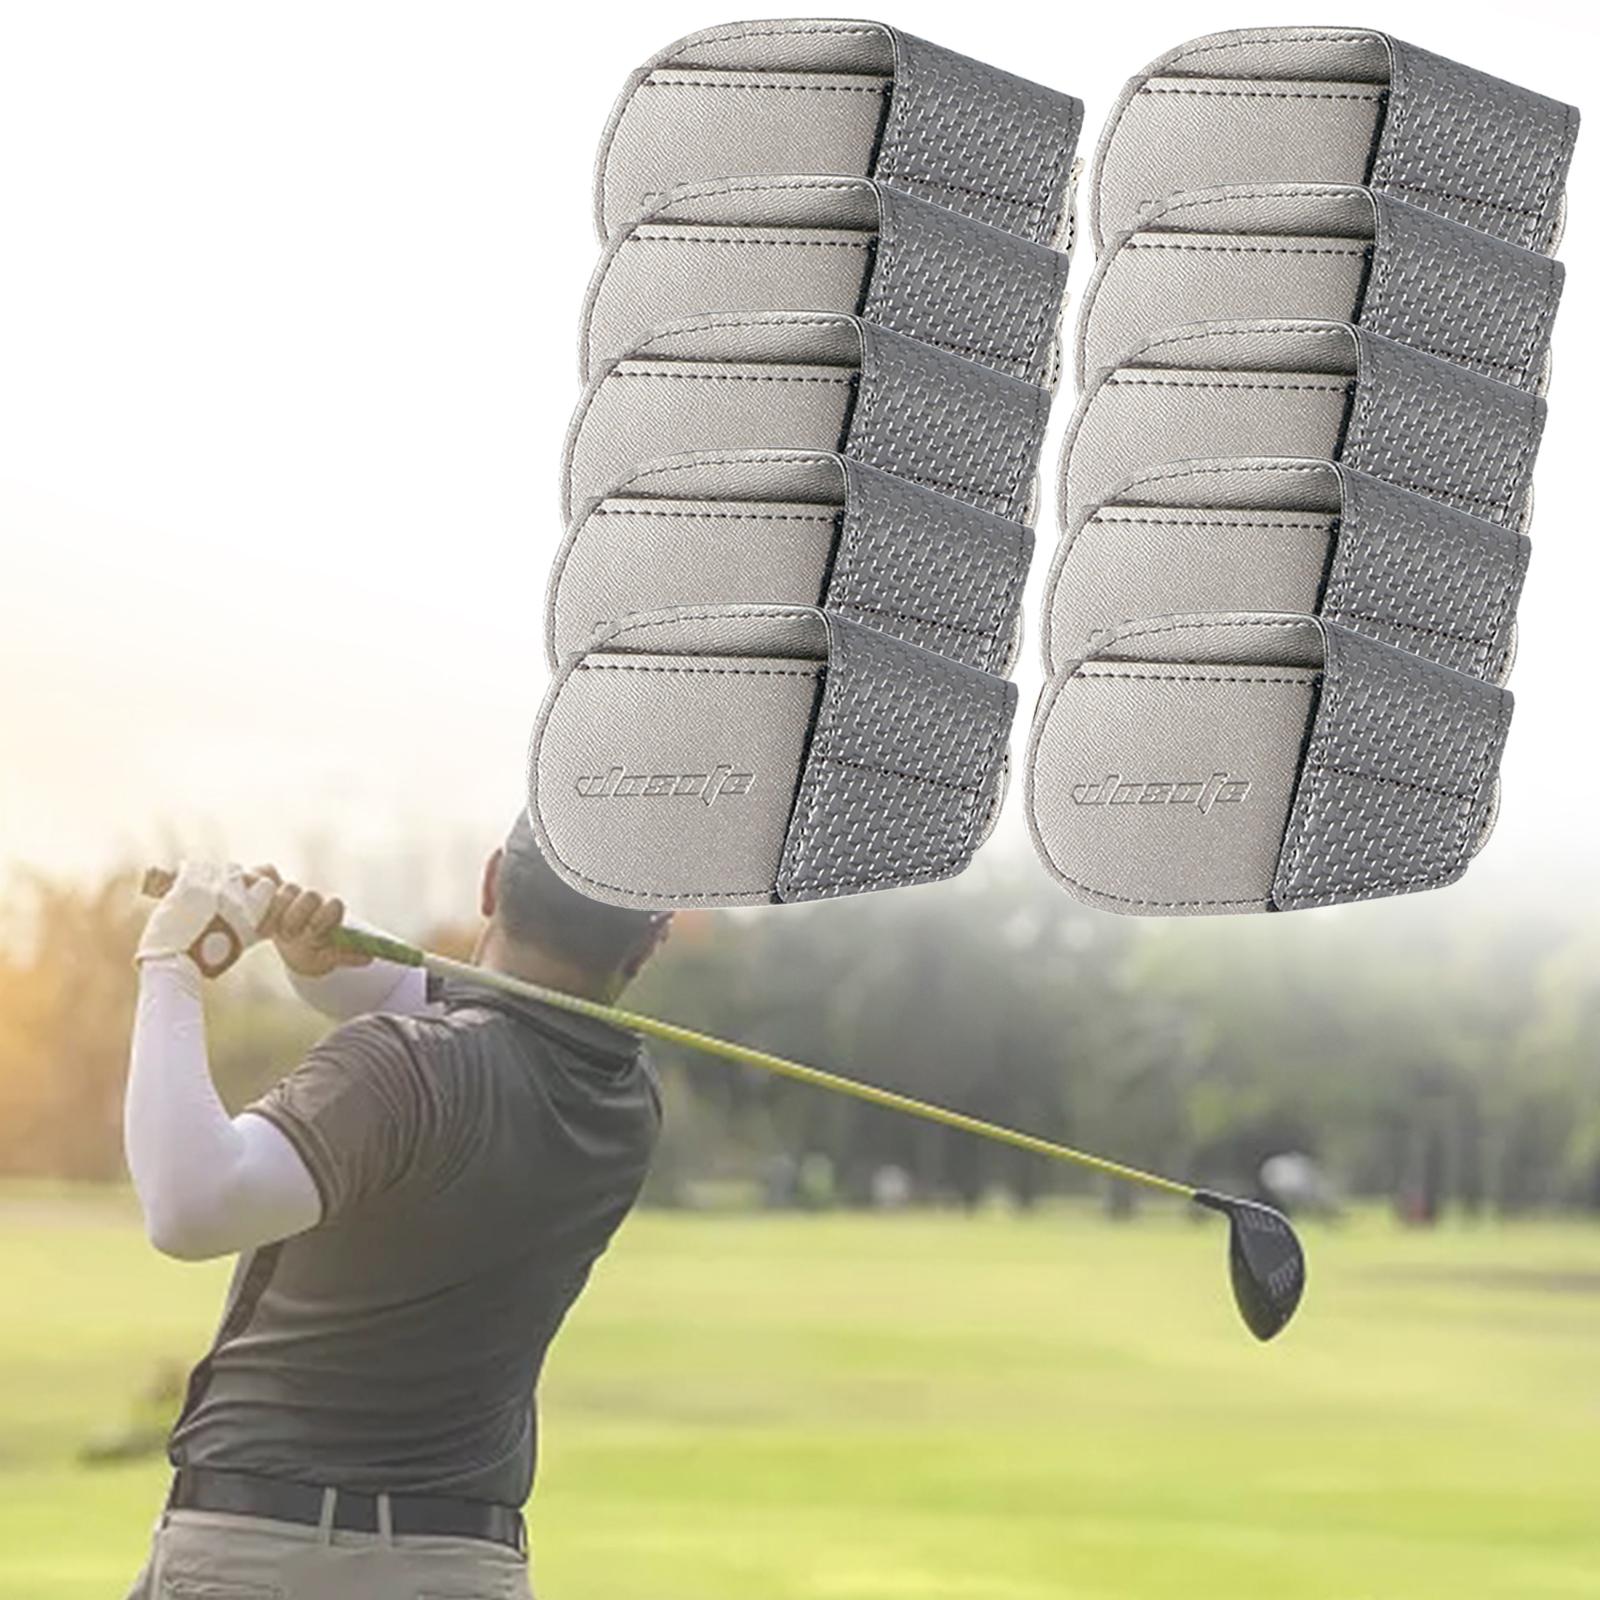 Golf Head Covers PU Portable Protector for Athlete Travel Golf Training Gray Small